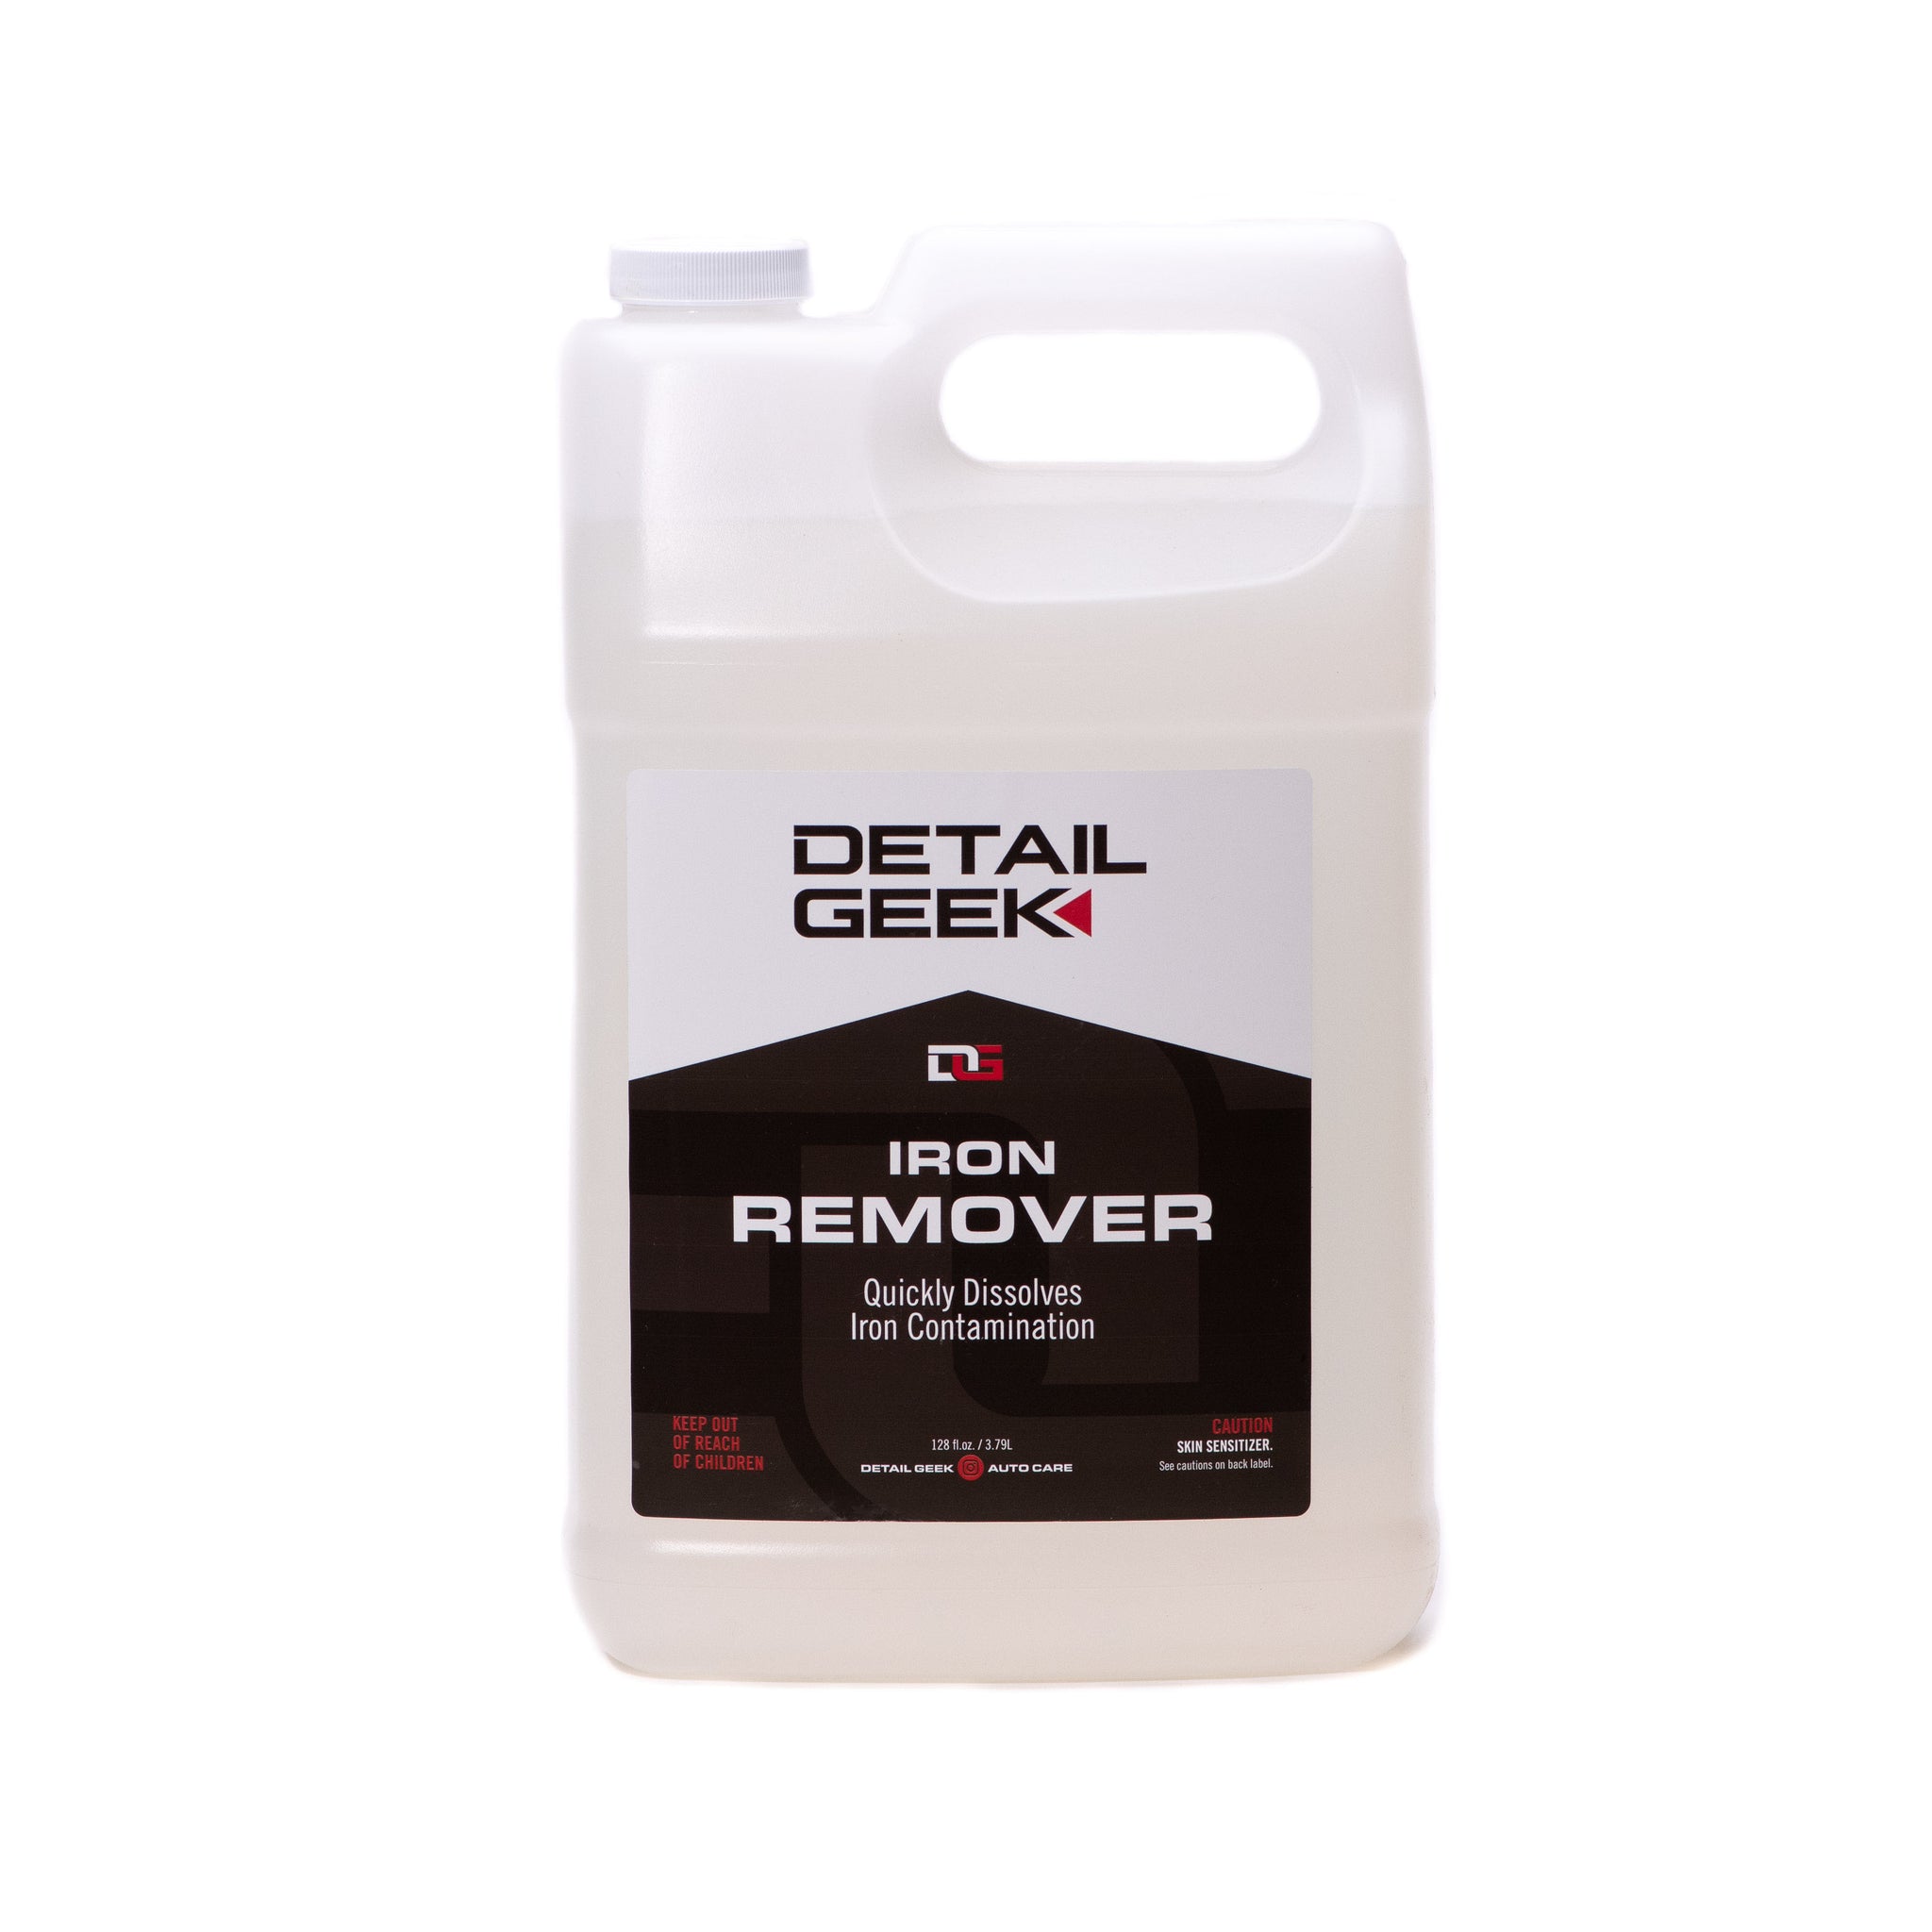 Iron Remover - Paint Decontamination and Brake Dust Removal 5 Gallon by Image Wash Products, Remove Iron Particles from Paint, Prevent Rust Damage